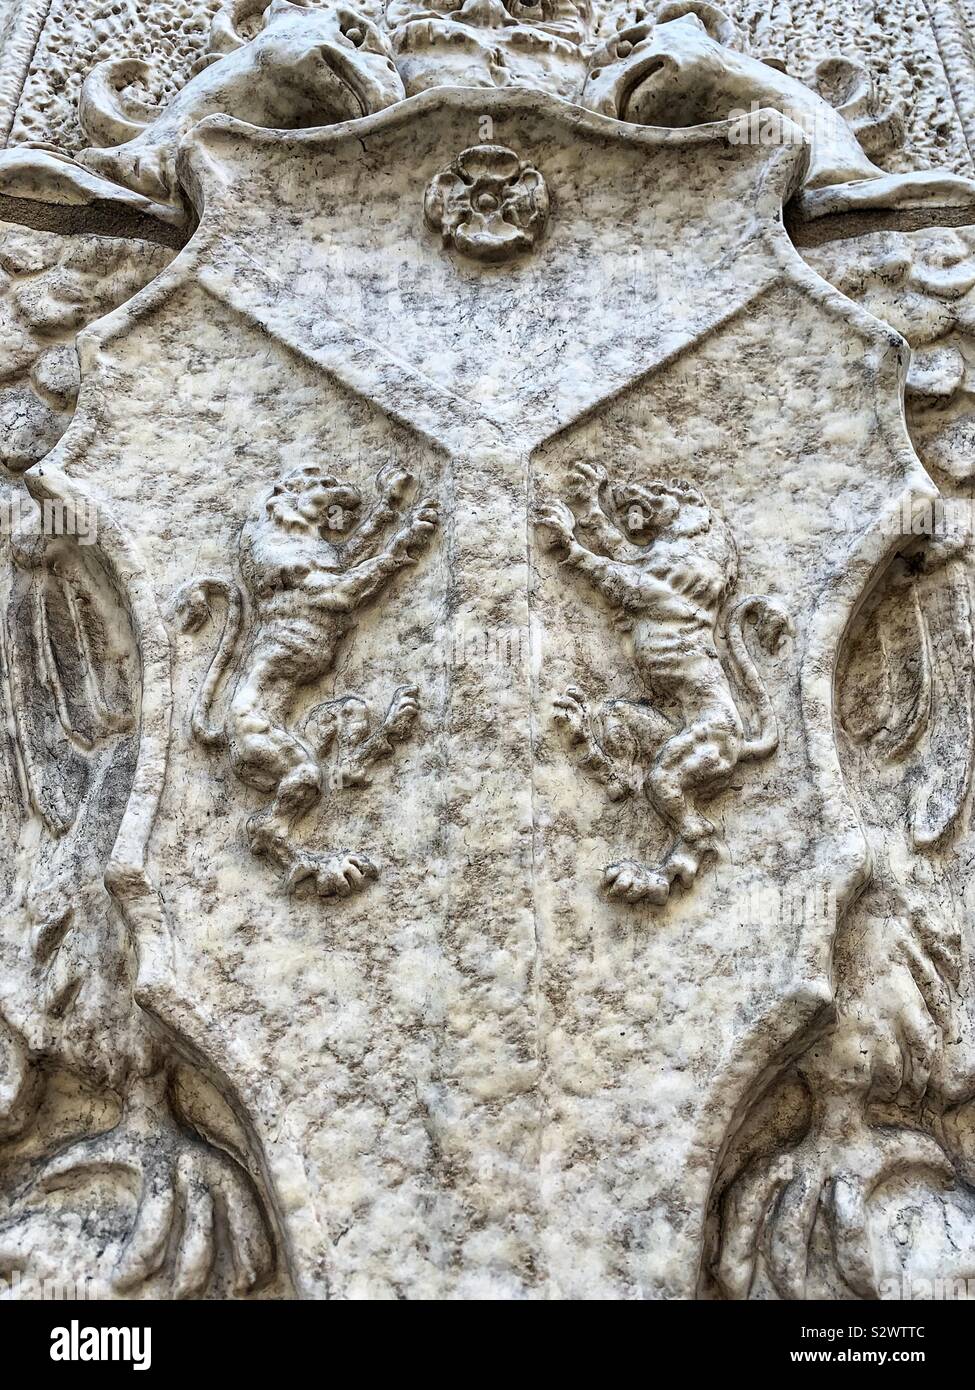 Marble carving of a crest with two lion griffins snarling at each other. Stock Photo